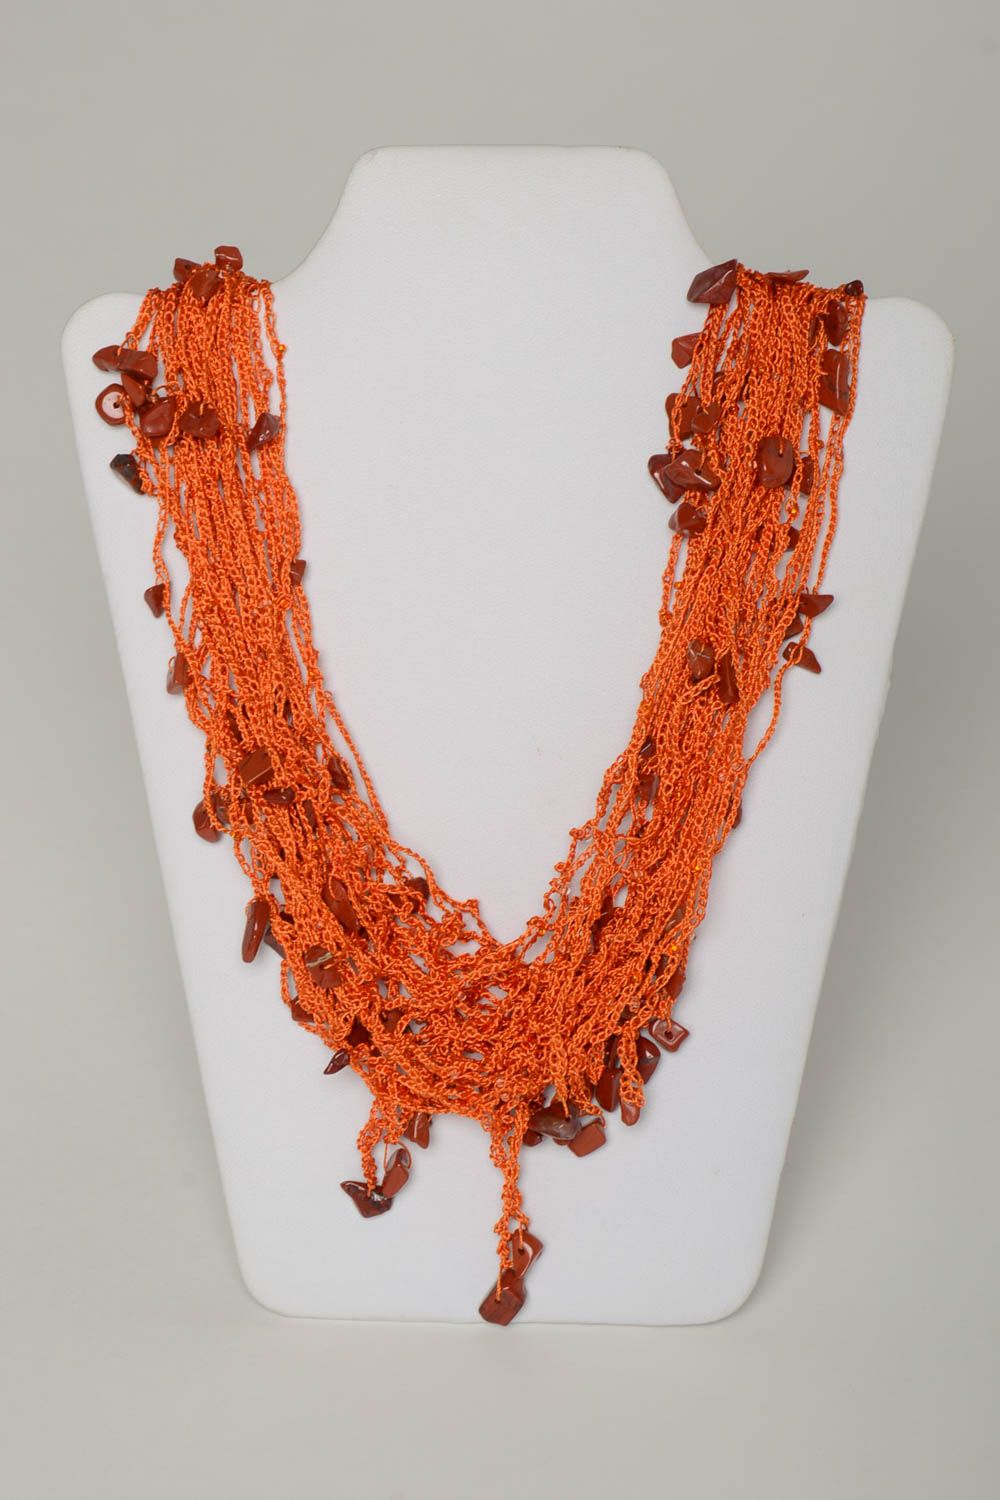 Unusual handmade crochet necklace handmade neck accessories gifts for her photo 2